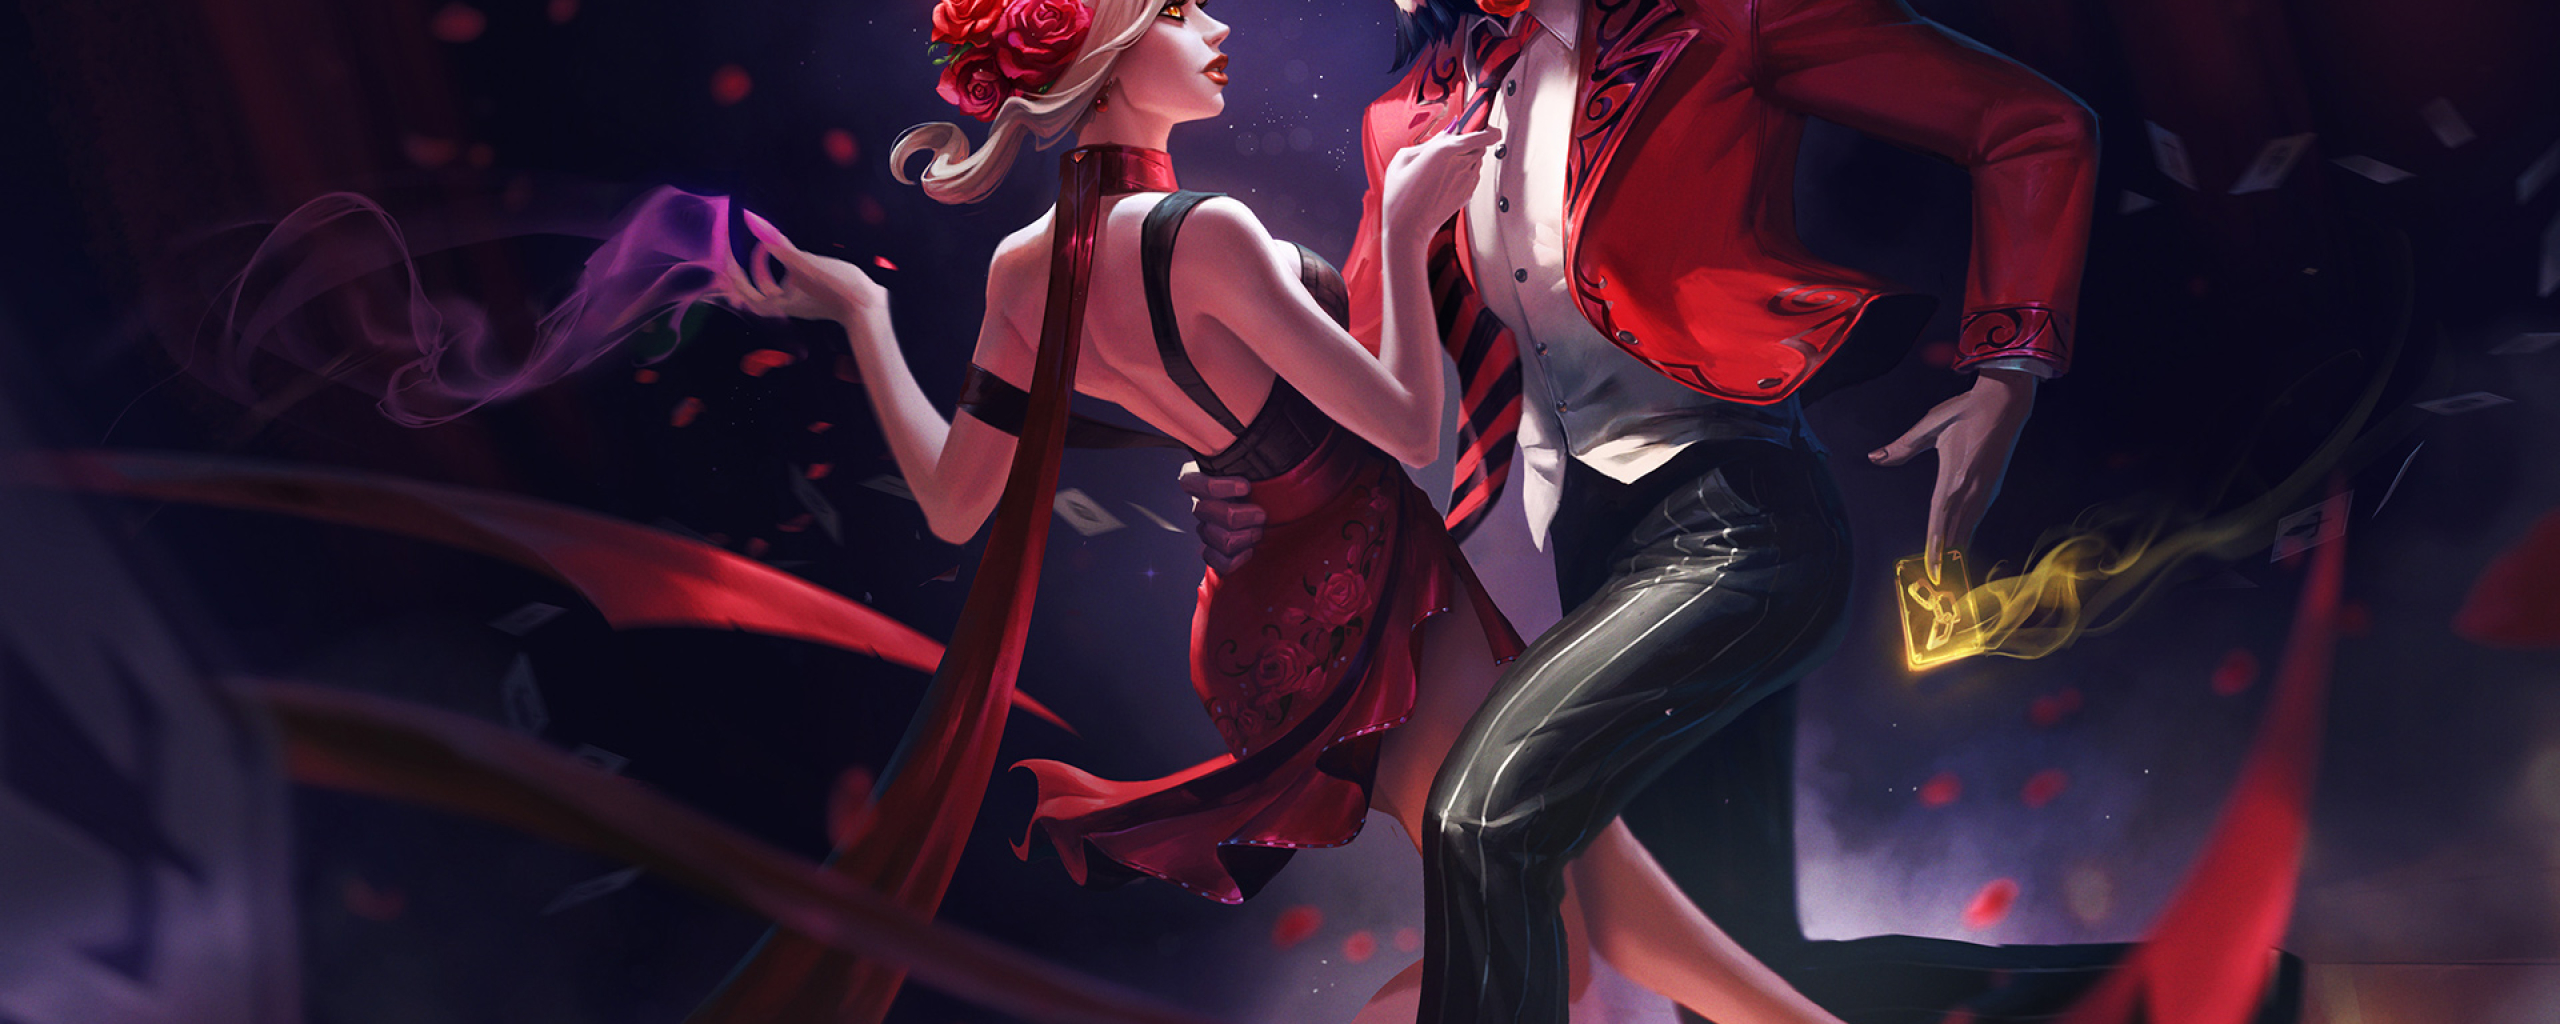 2560x1024 Evelynn And Twisted Fate League Of Legends 2560x1024 Resolution Wallpaper Hd Games 4k Wallpapers Images Photos And Background Wallpapers Den